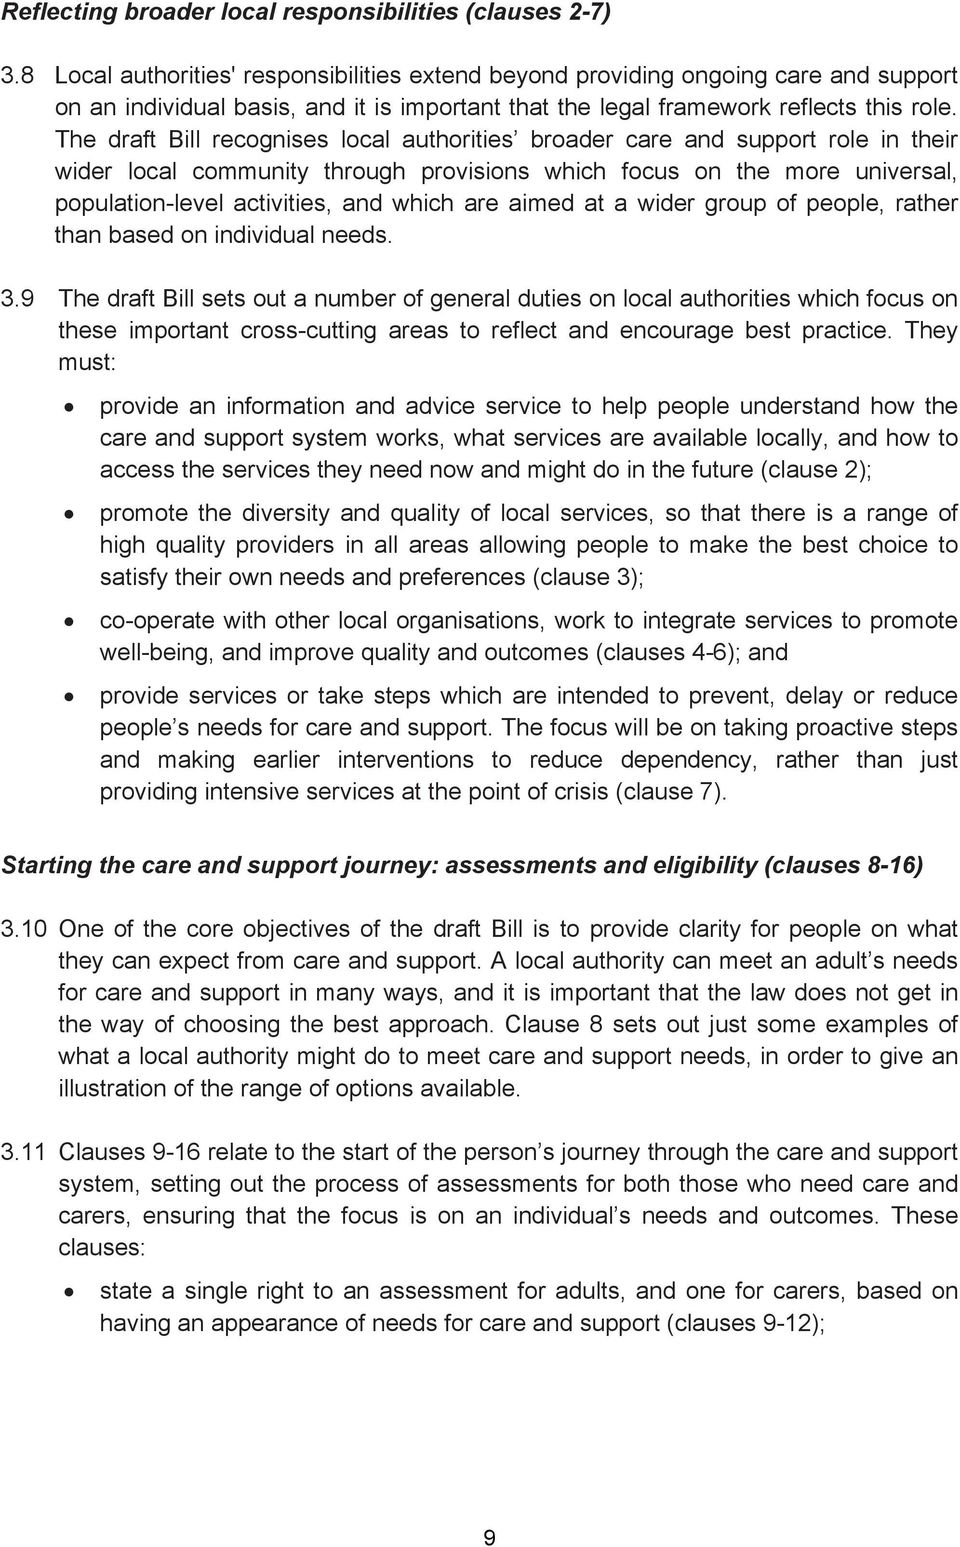 The draft Bill recognises local authorities broader care and support role in their wider local community through provisions which focus on the more universal, population-level activities, and which